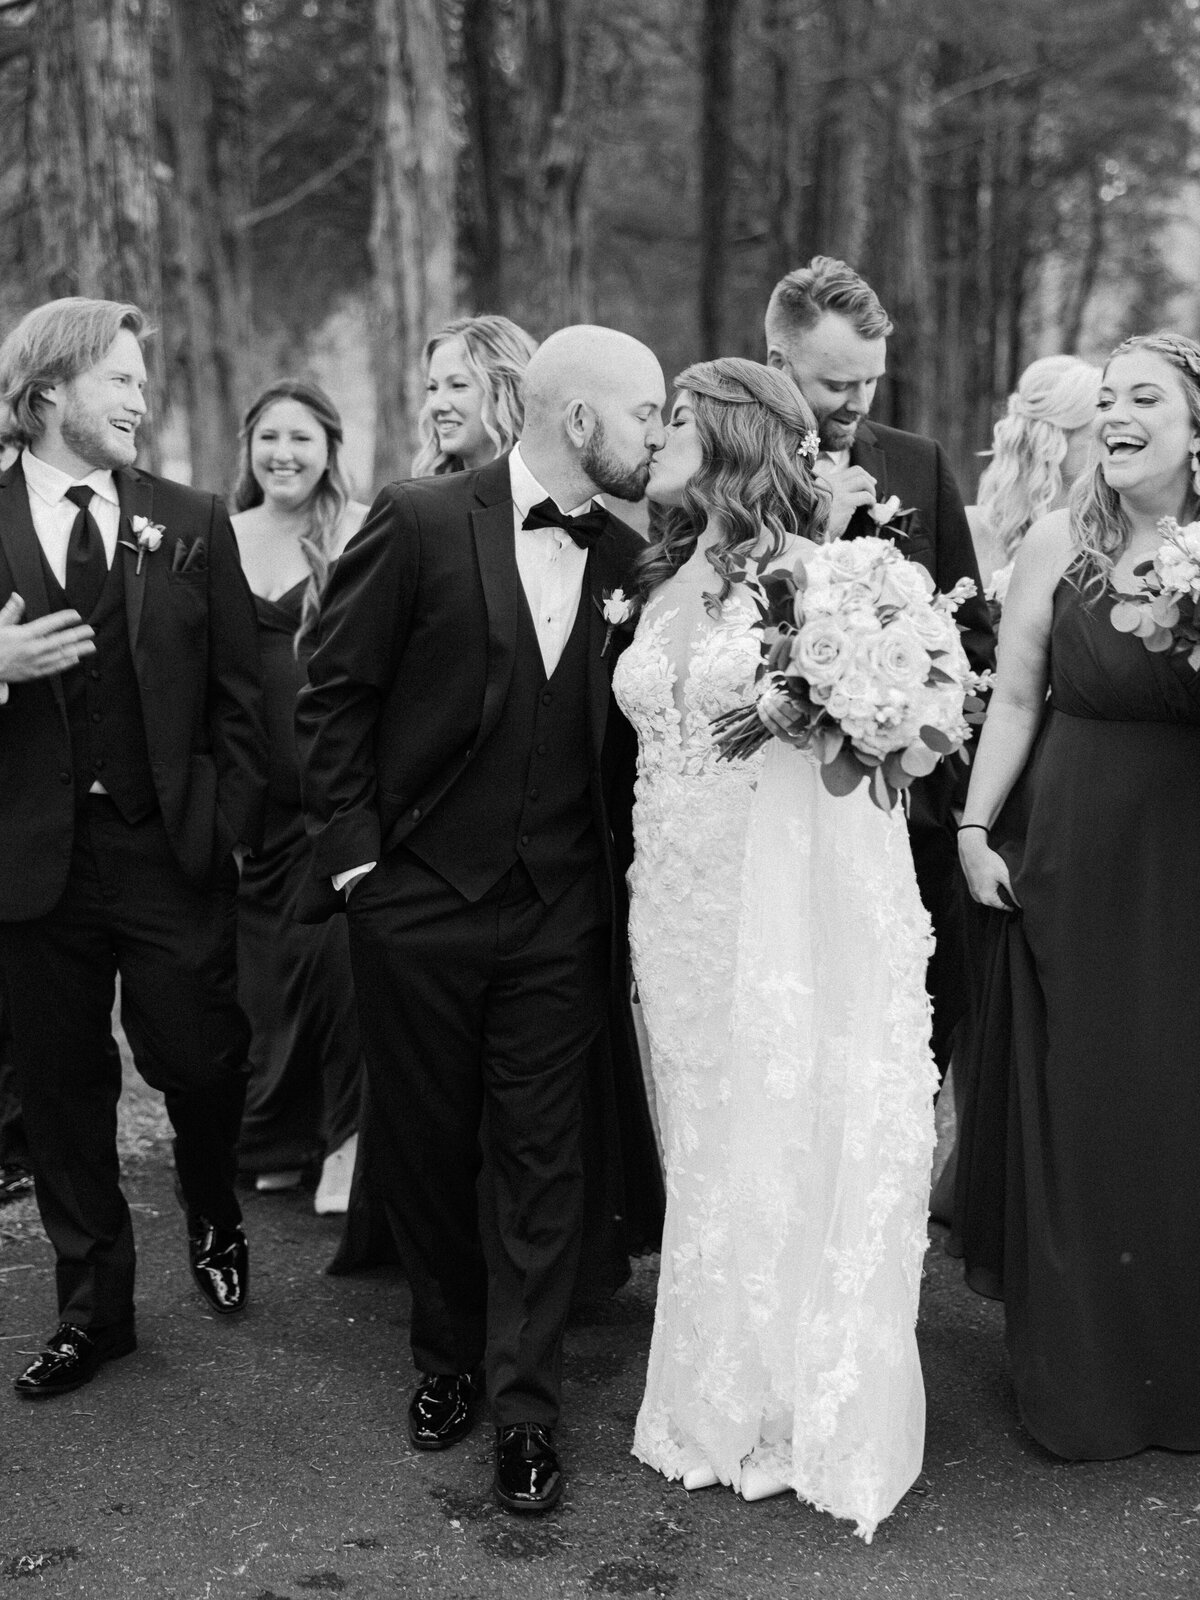 A black and white image of a bride and groom sharing a kiss as they walk with their bridal party